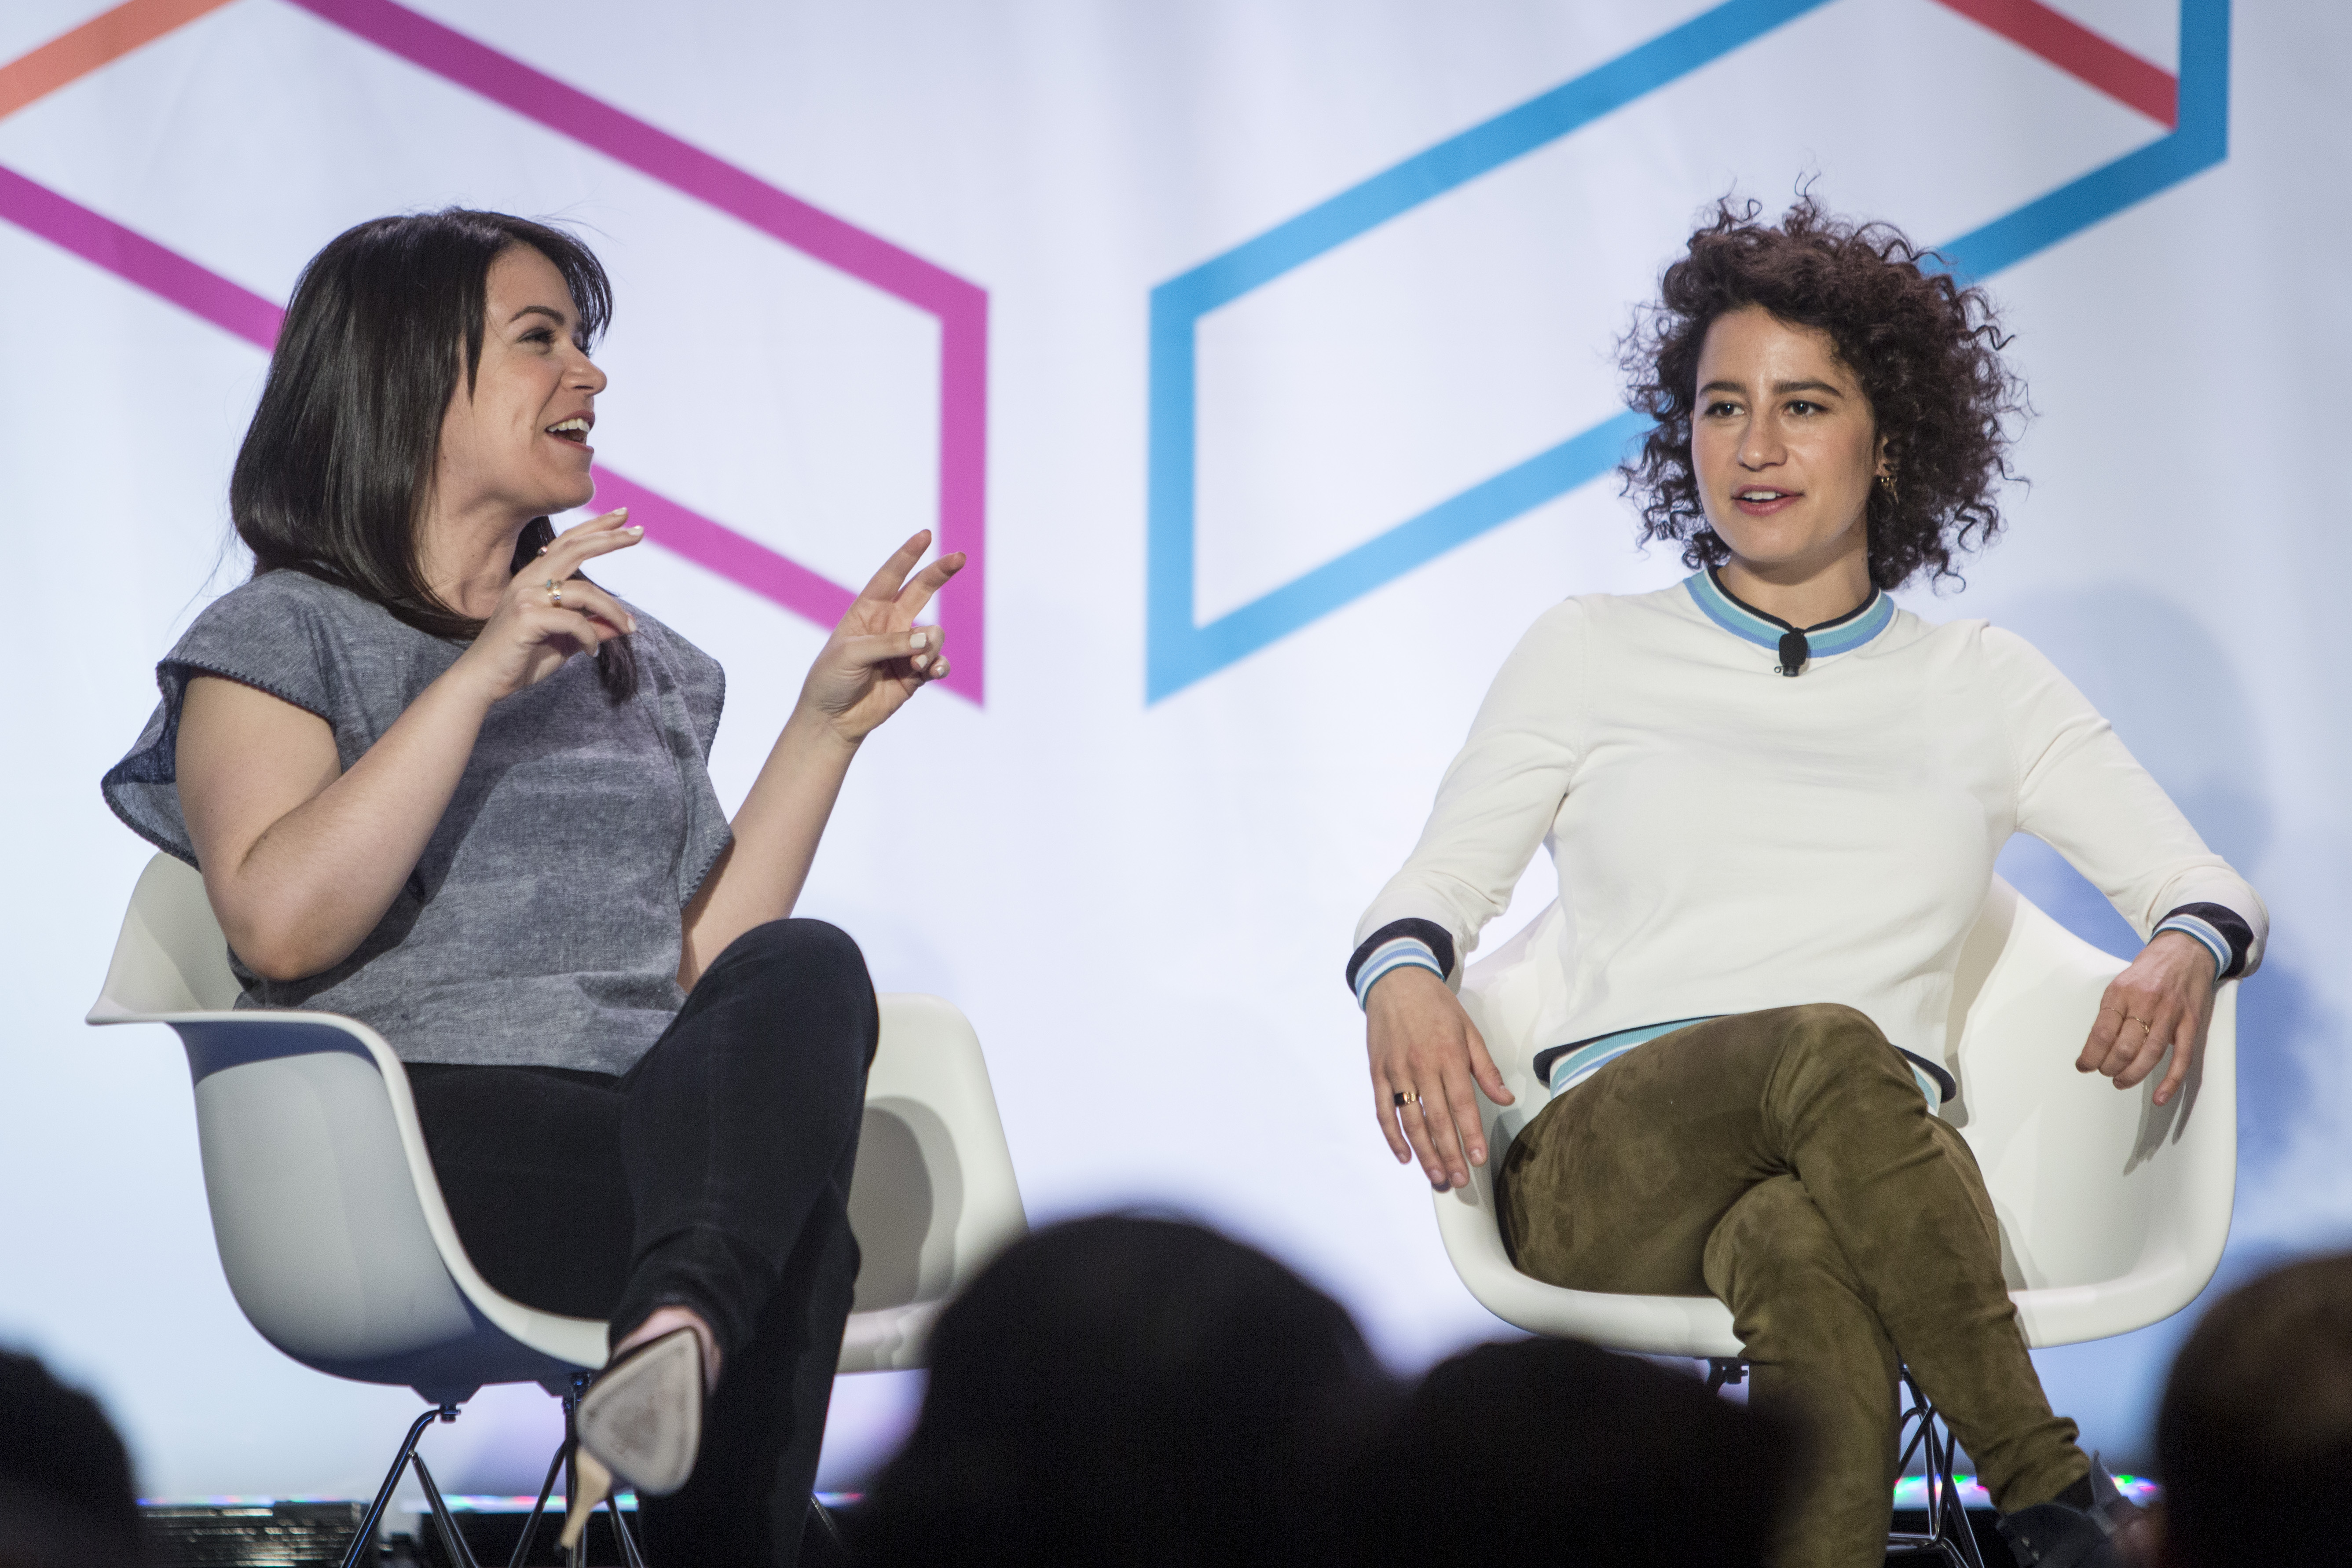 Marie Claire Editor in Chief Anne Fulenwider interviews Broad City's Abbi Jacobson and Ilana Glazer on the YP Stage on Day 1 of Internet Week New York May 18, 2015. INSIDER IMAGES/Gary He